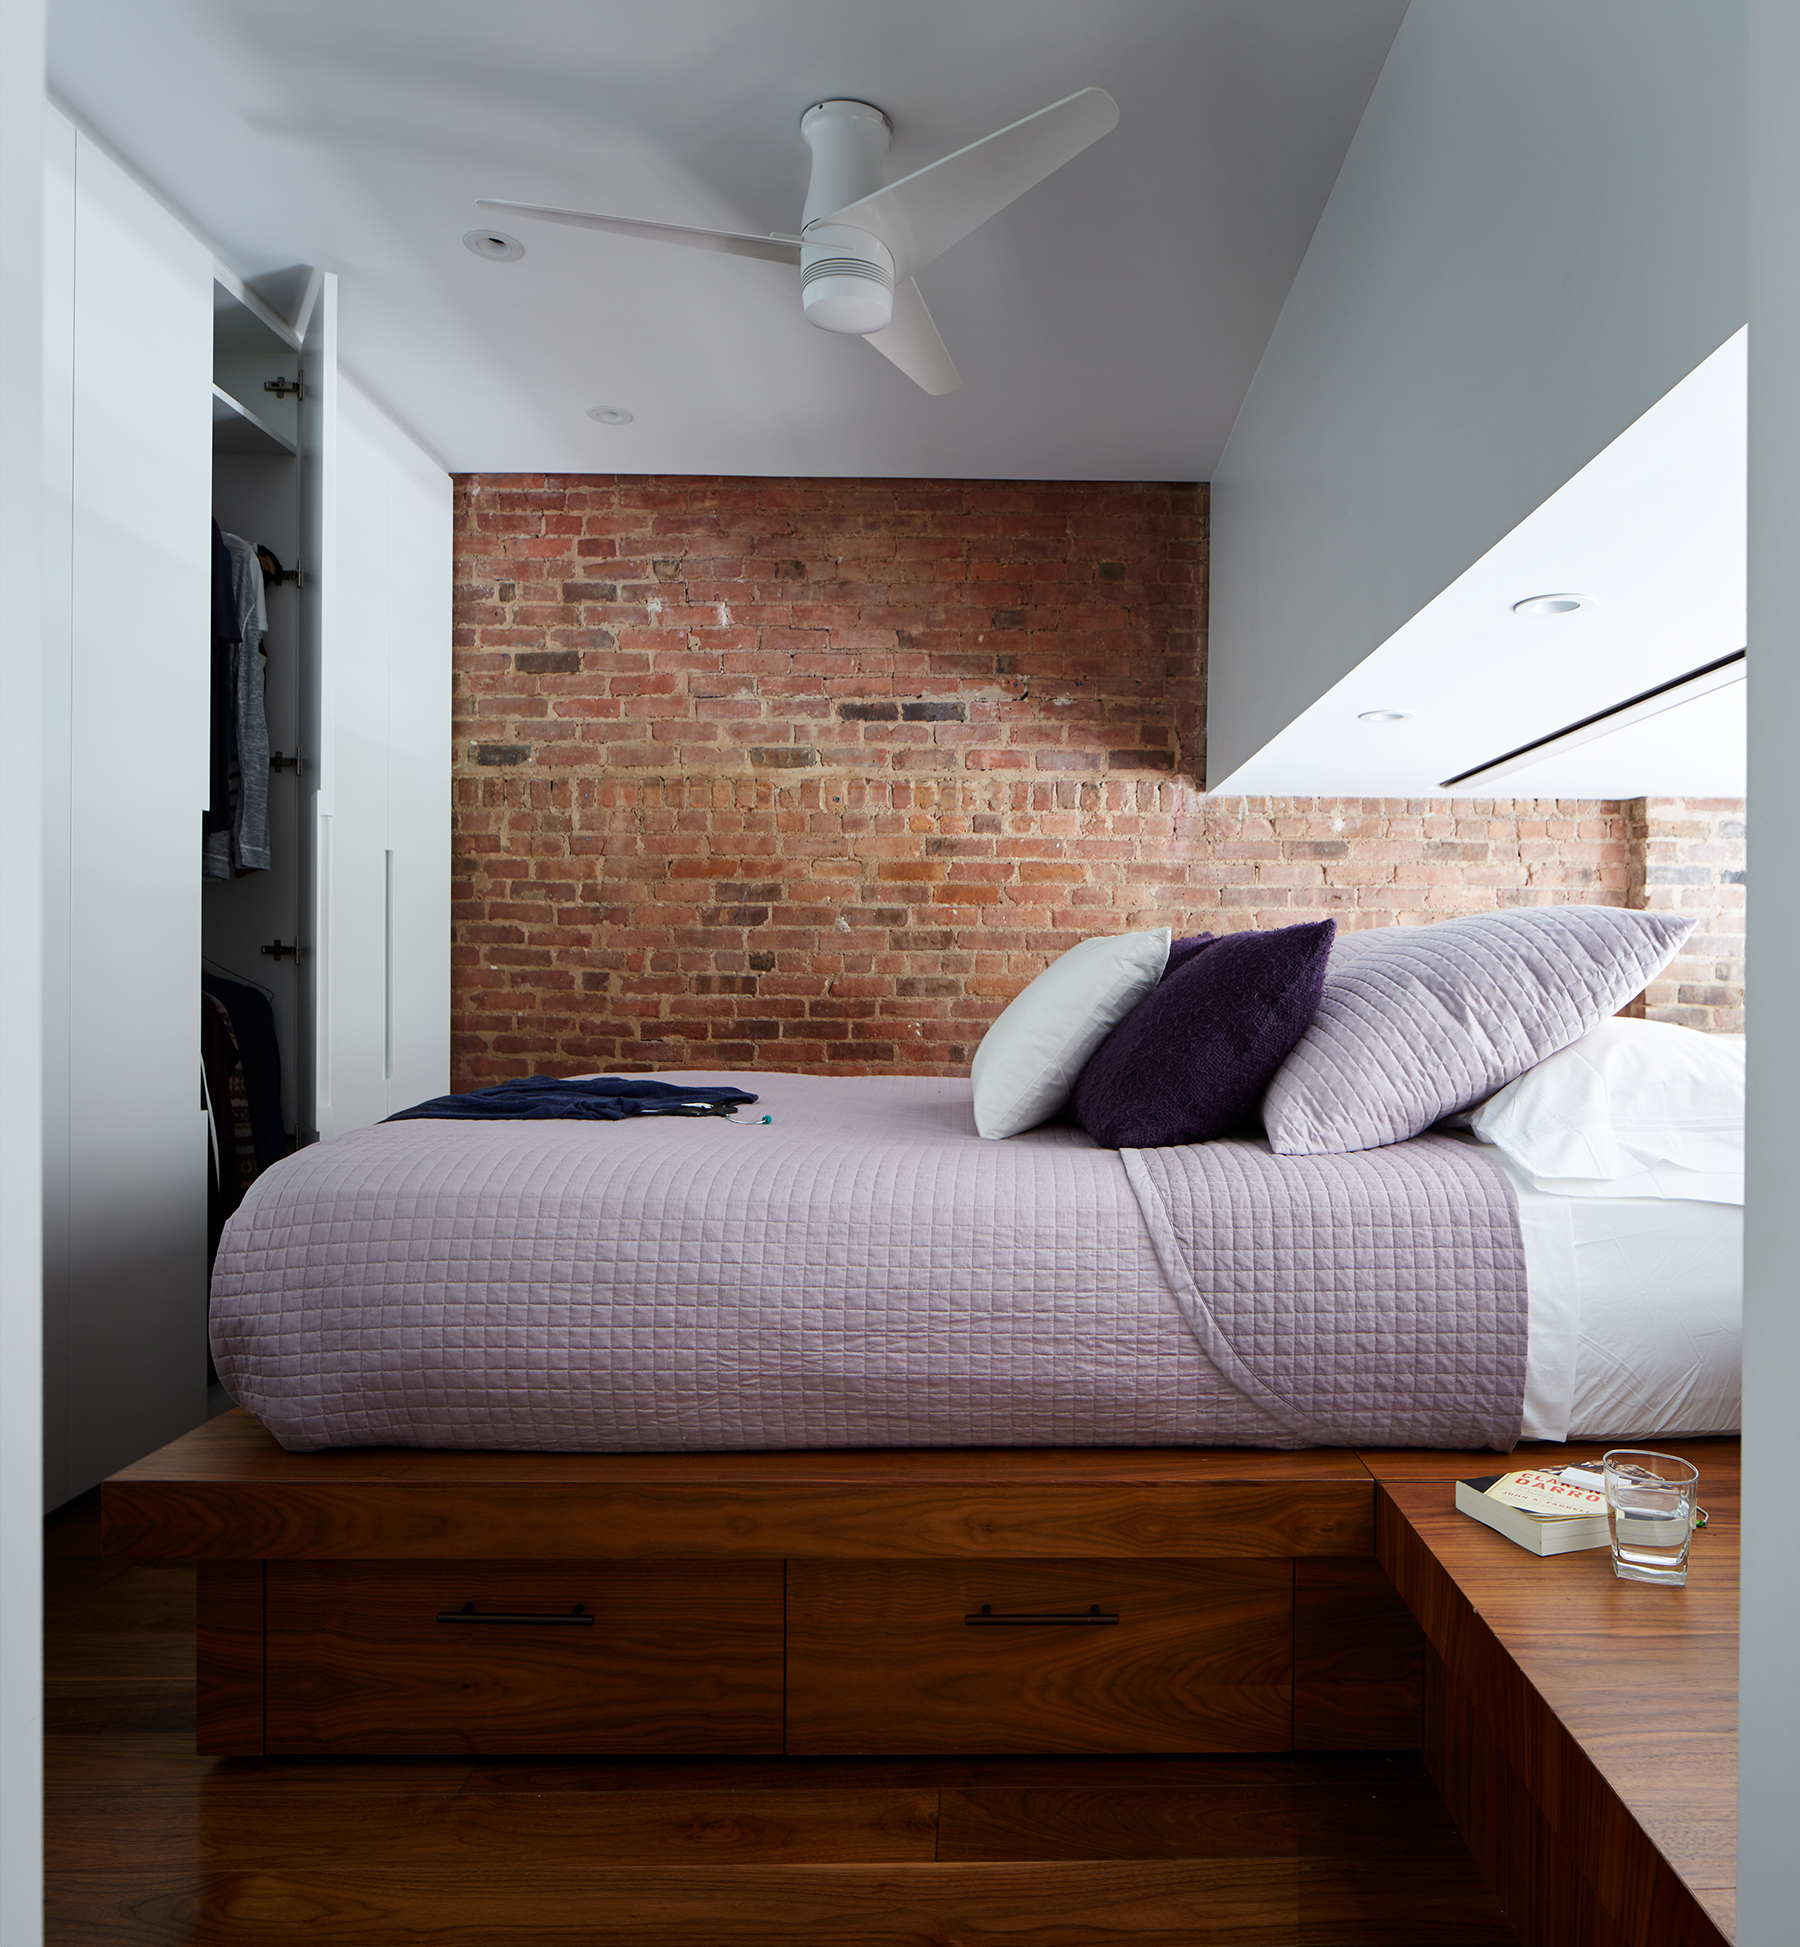 STADT Architecture, Loft, Lutron, Built-in bed, platform bed, STADT, nyc architects, ny apartment renovation